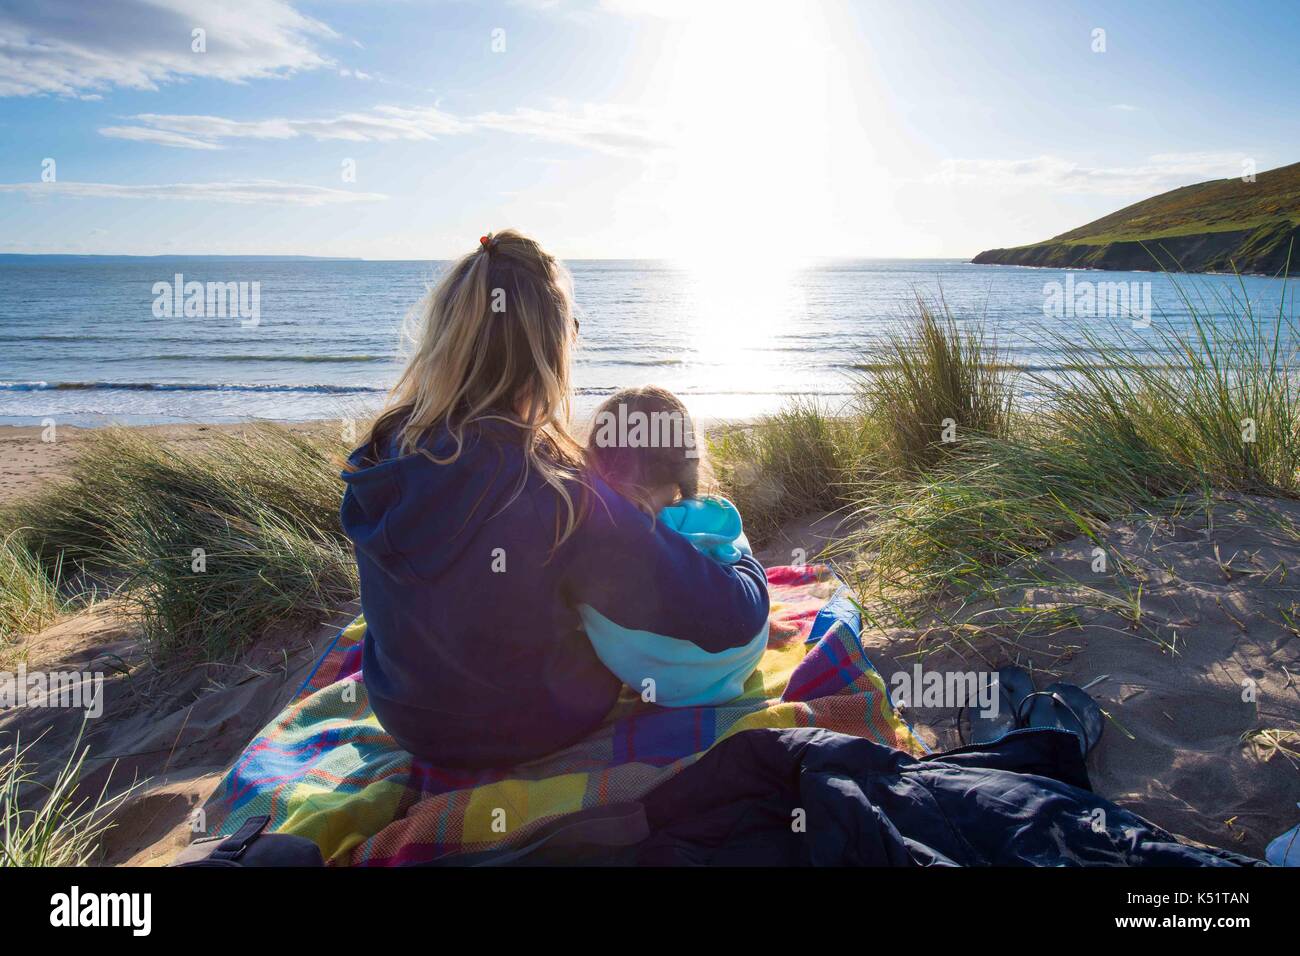 A mother and daughter on a beach at sunset cuddling Stock Photo